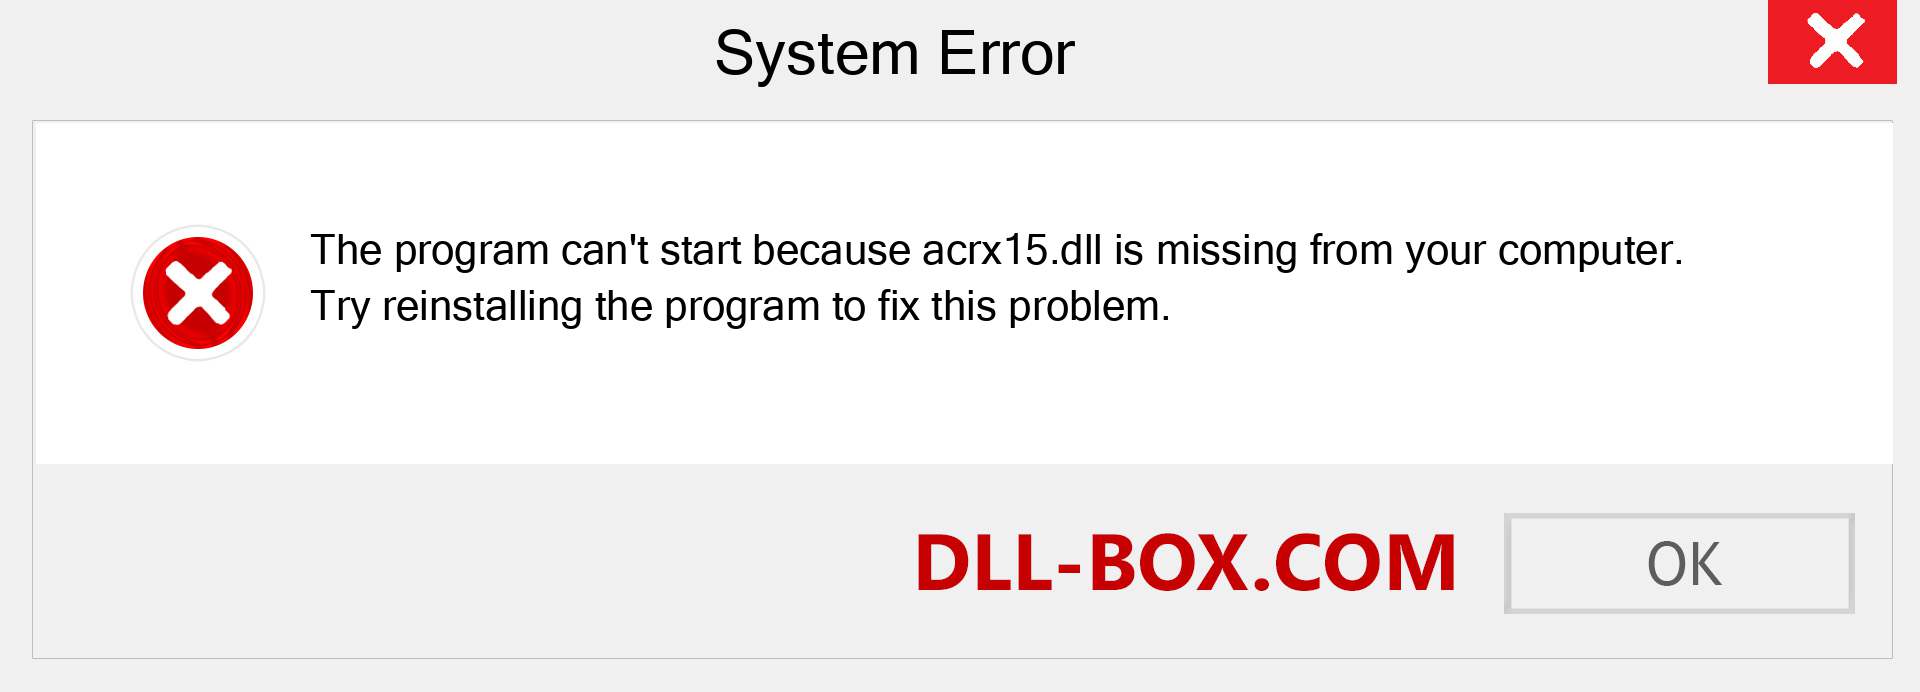  acrx15.dll file is missing?. Download for Windows 7, 8, 10 - Fix  acrx15 dll Missing Error on Windows, photos, images